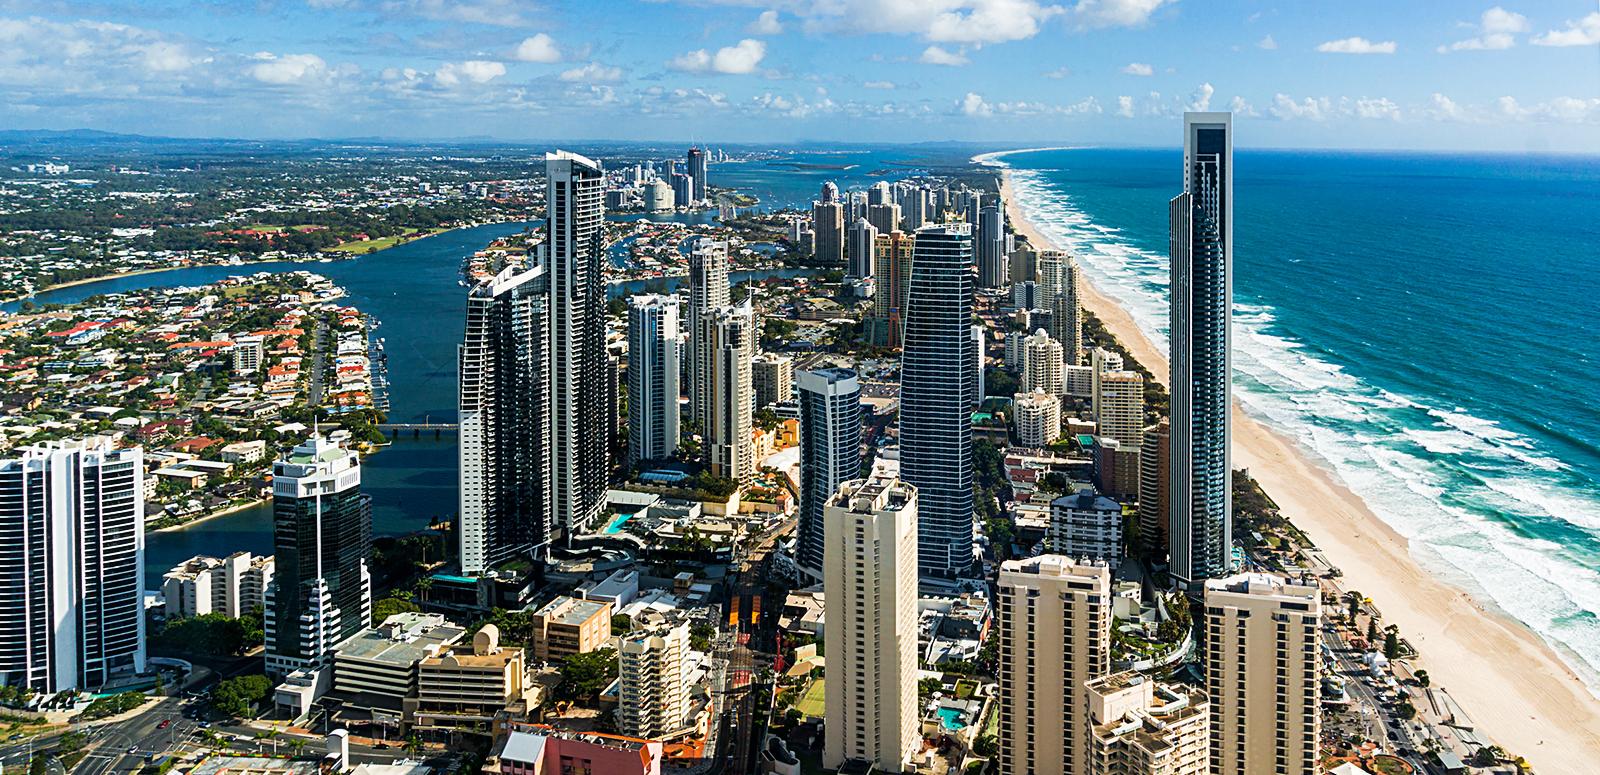 Aerial photo of the Gold Coast showing long stretch of beach, ocean and high rise buildings.